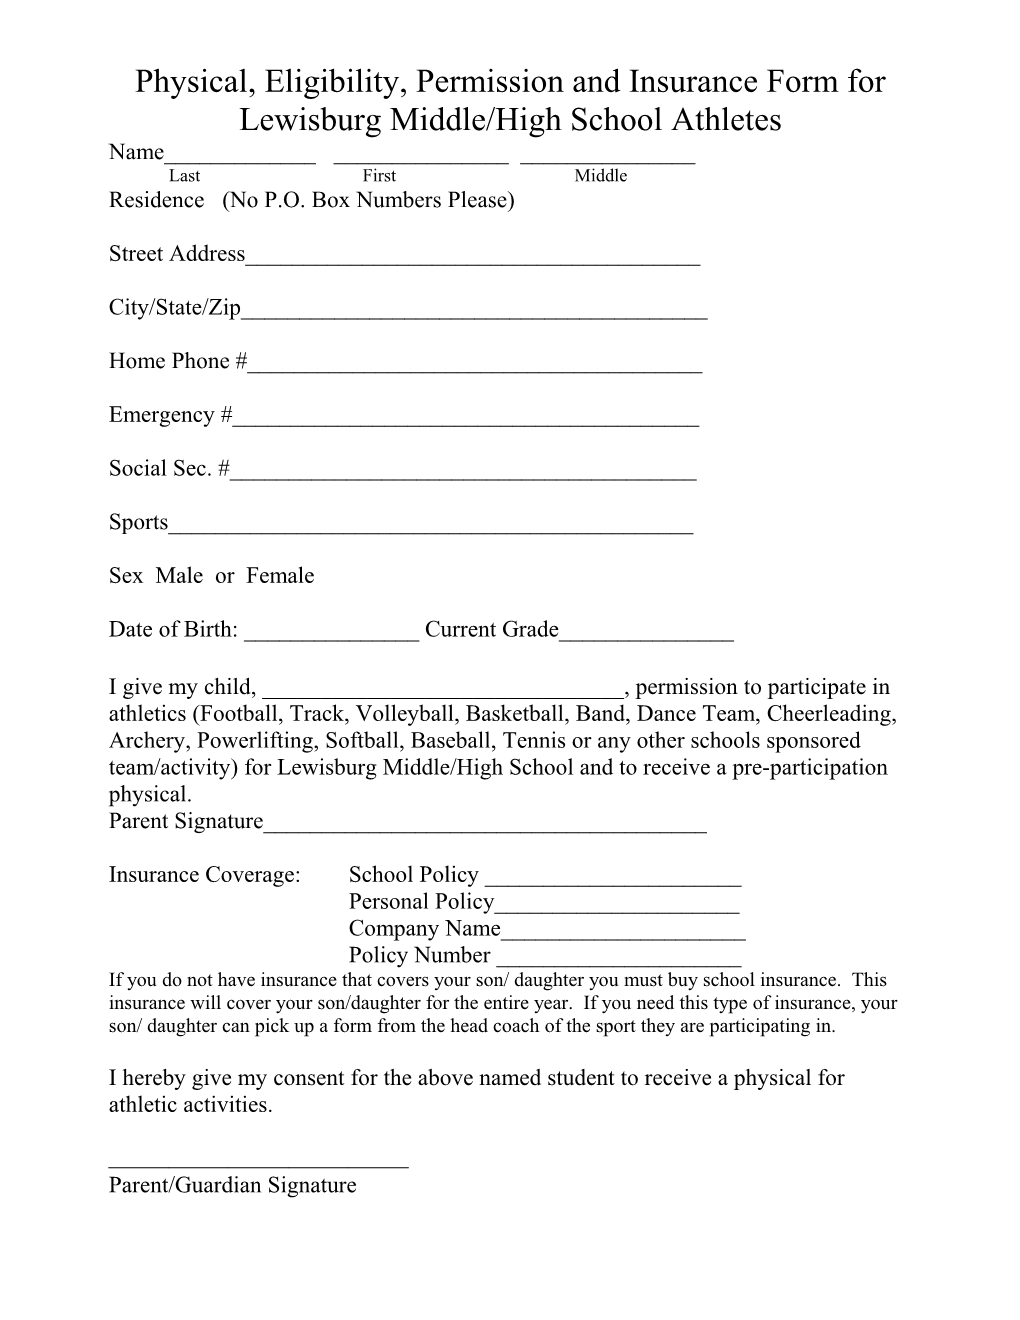 Physical, Eligibility, Permission and Insurance Form for Lewisburg Middle/High School Athletes